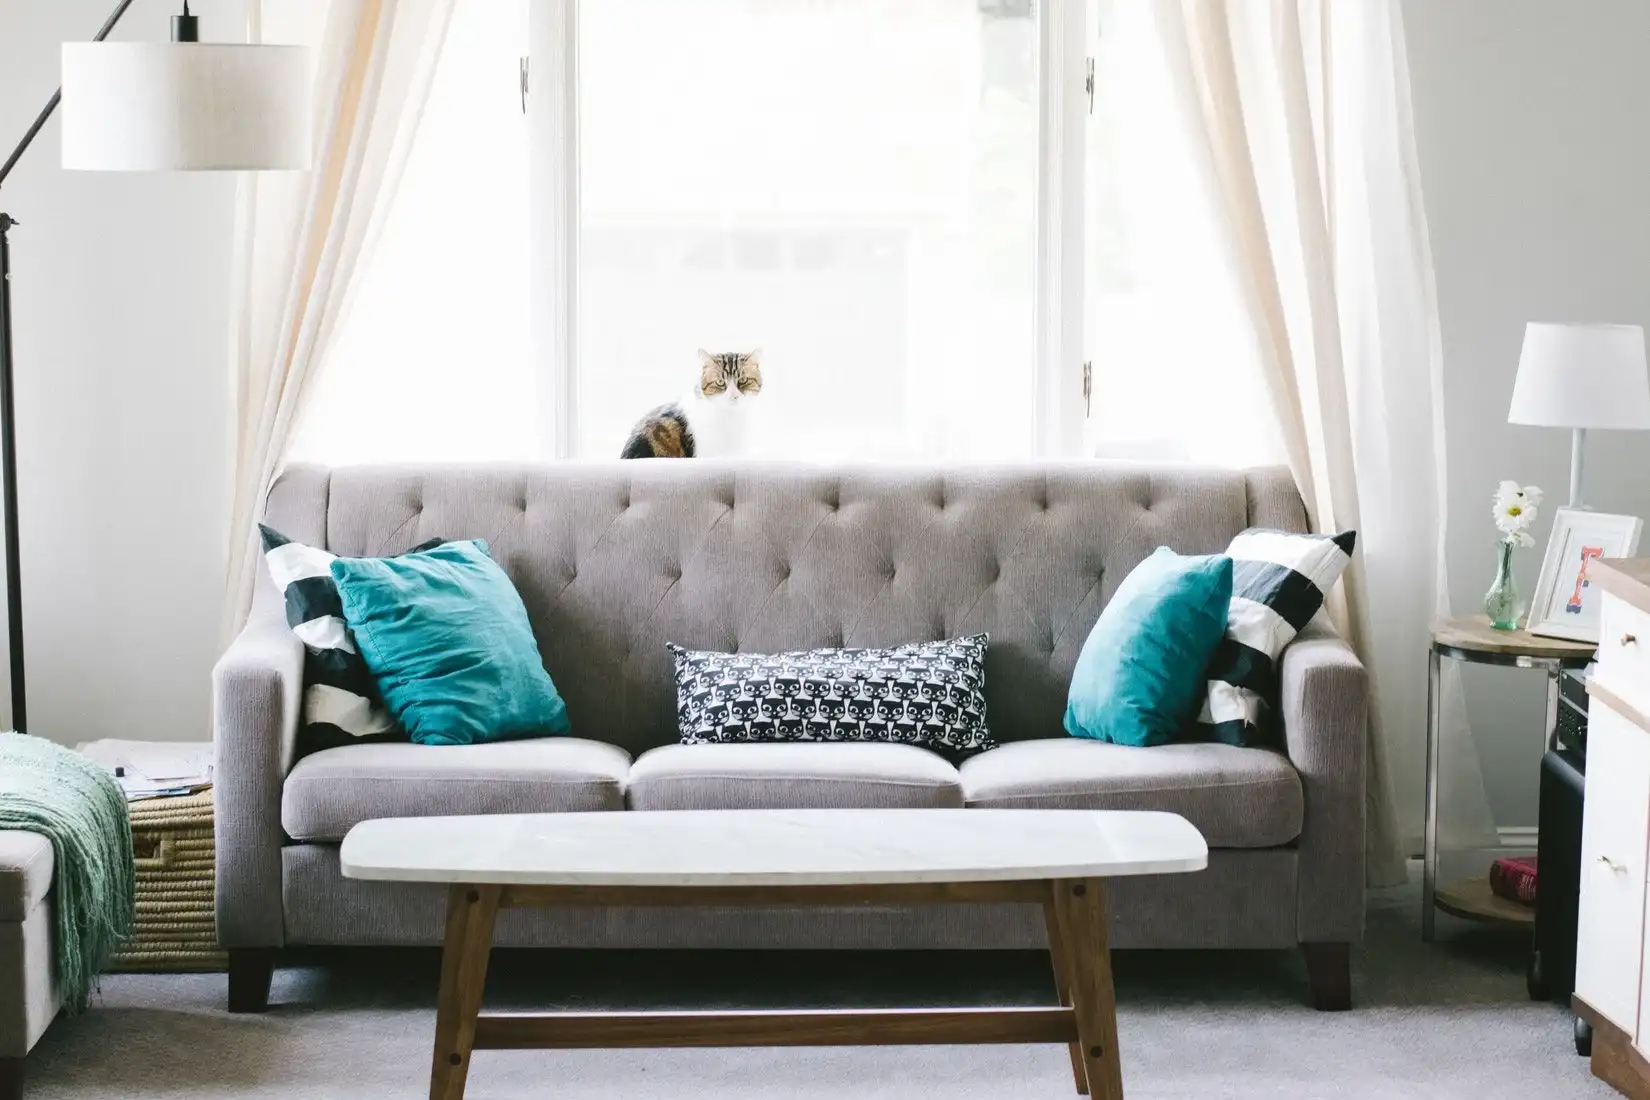 Here’s Why You Need to Sell Extended Warranties on Your Furniture